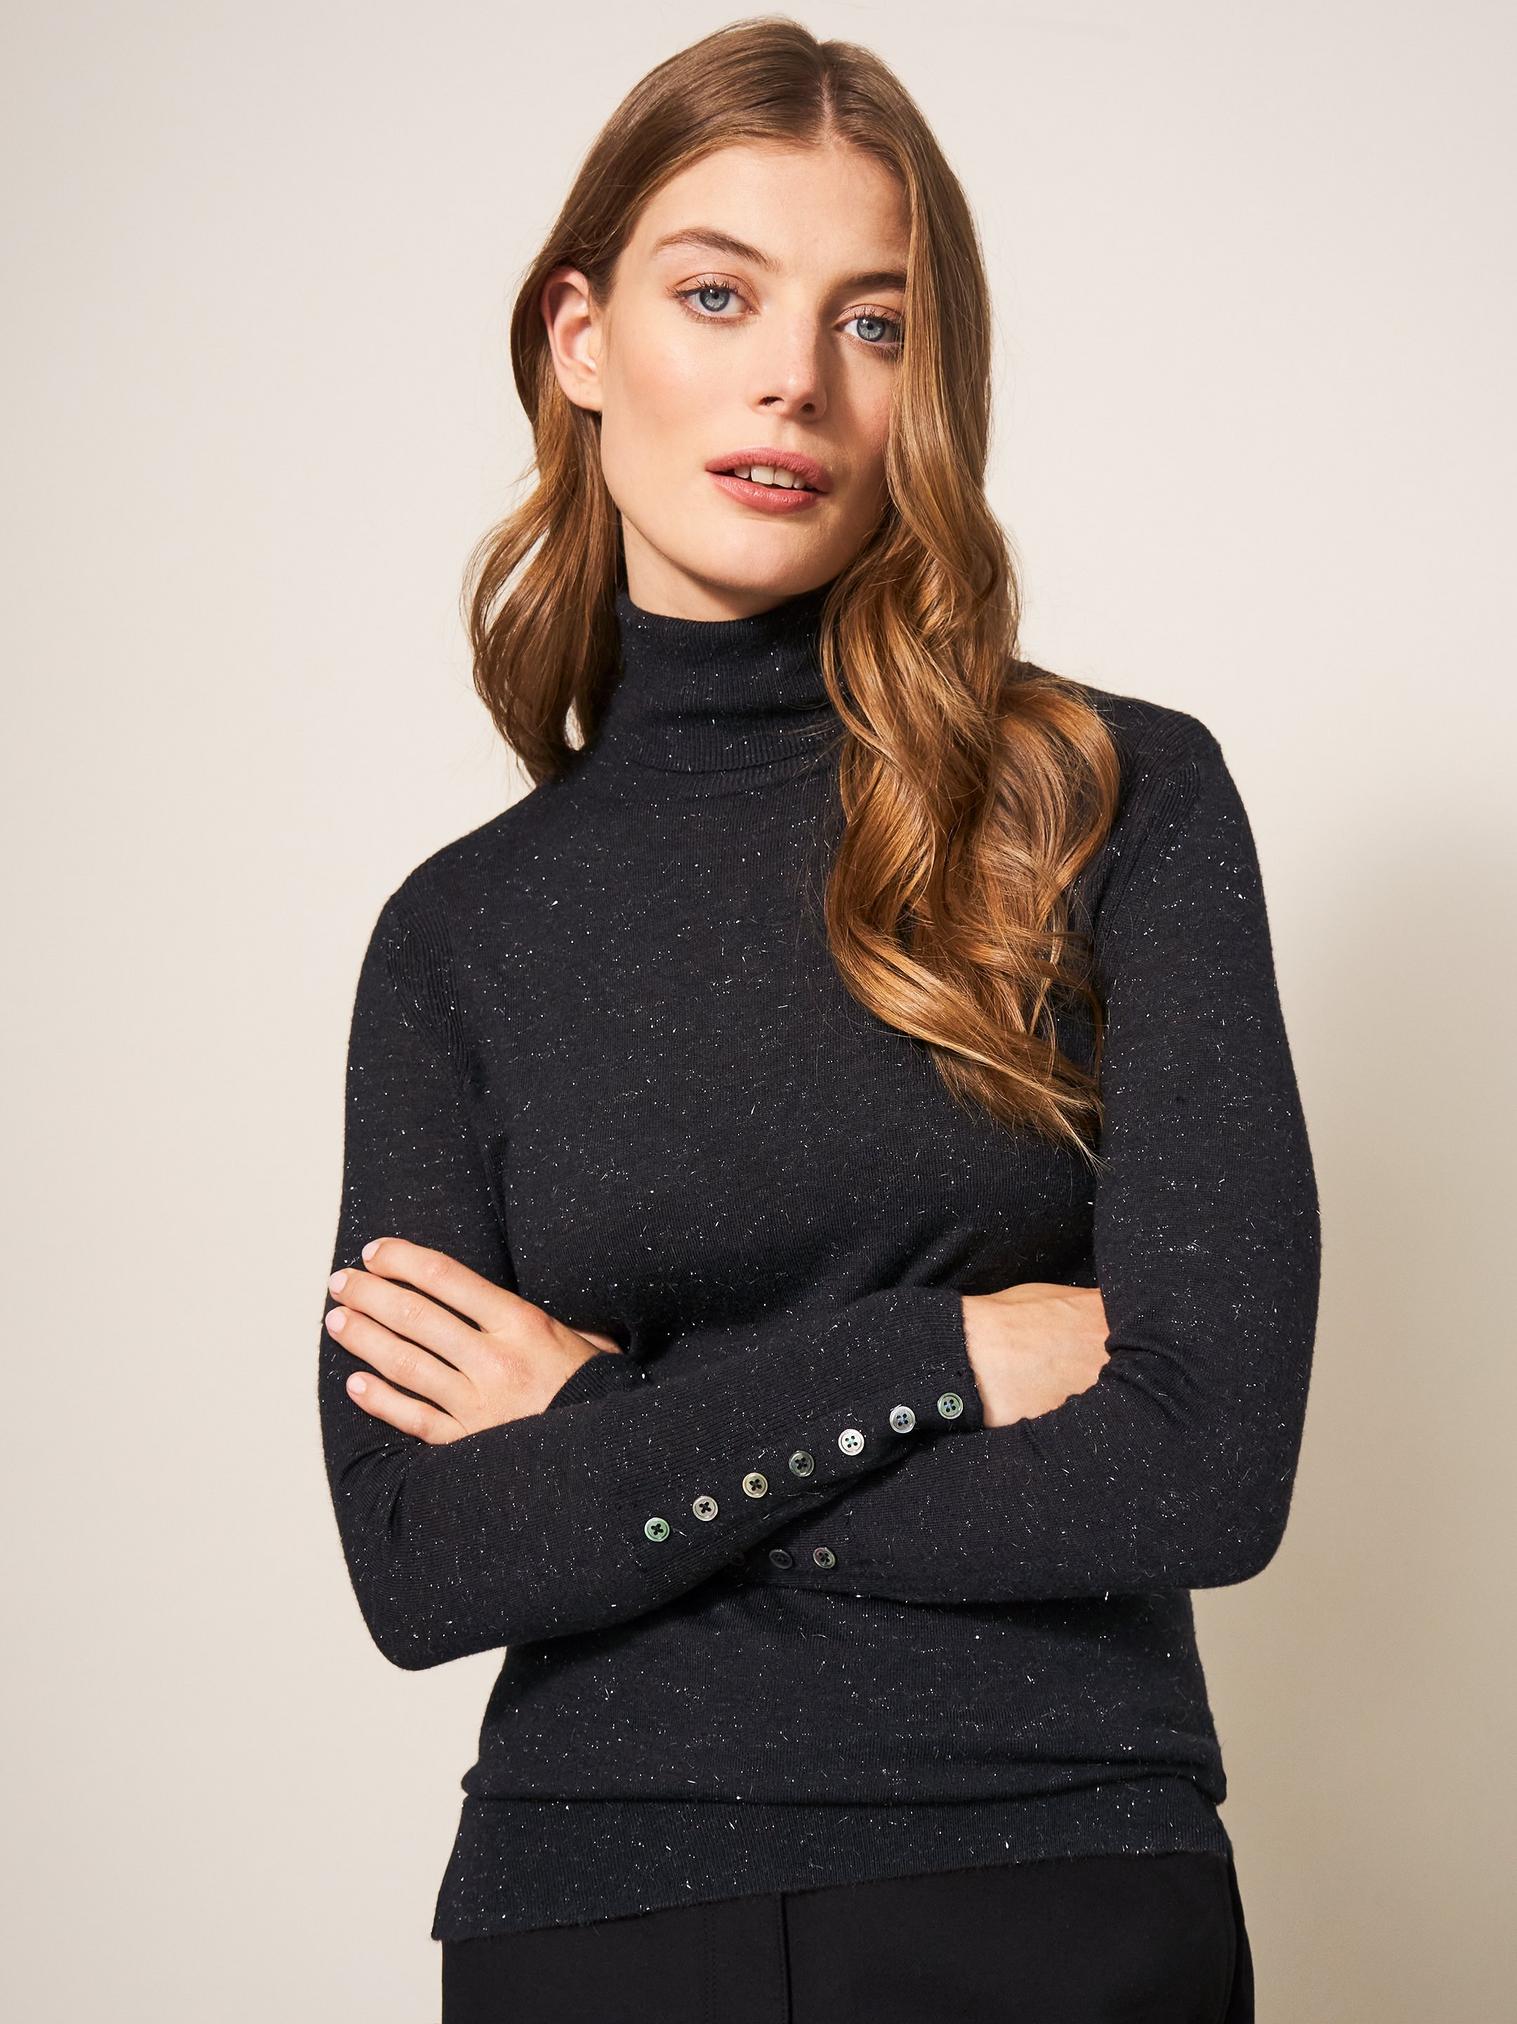 SPARKLE ROLL NECK JUMPER in CHARC GREY - LIFESTYLE